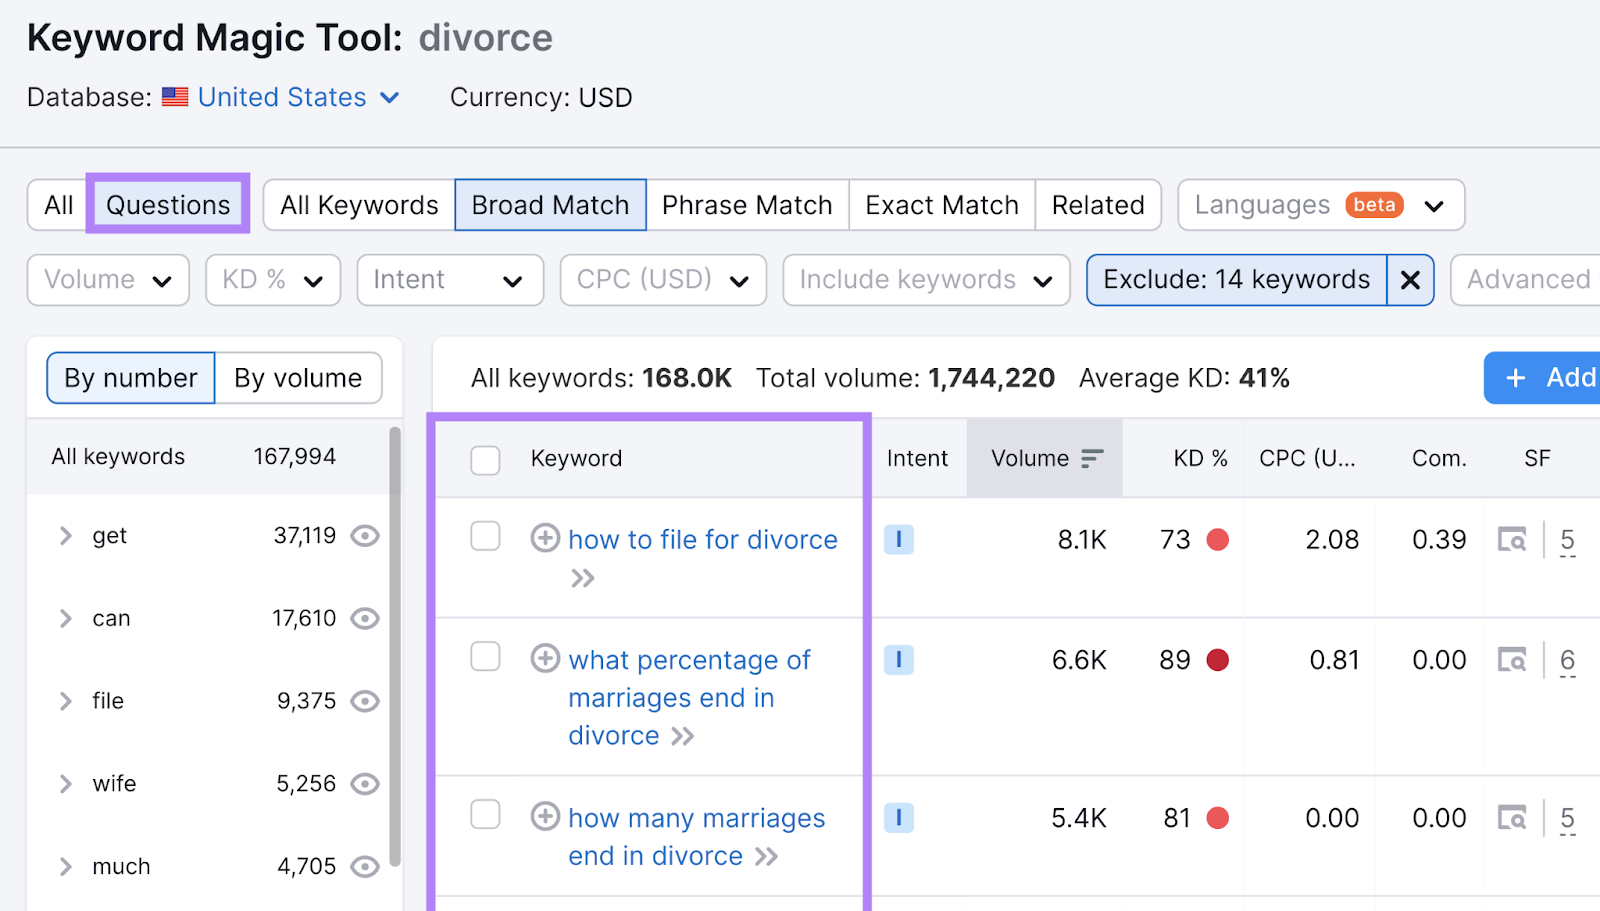 "Questions" keywords related to "divorce" in Keyword Magic Tool